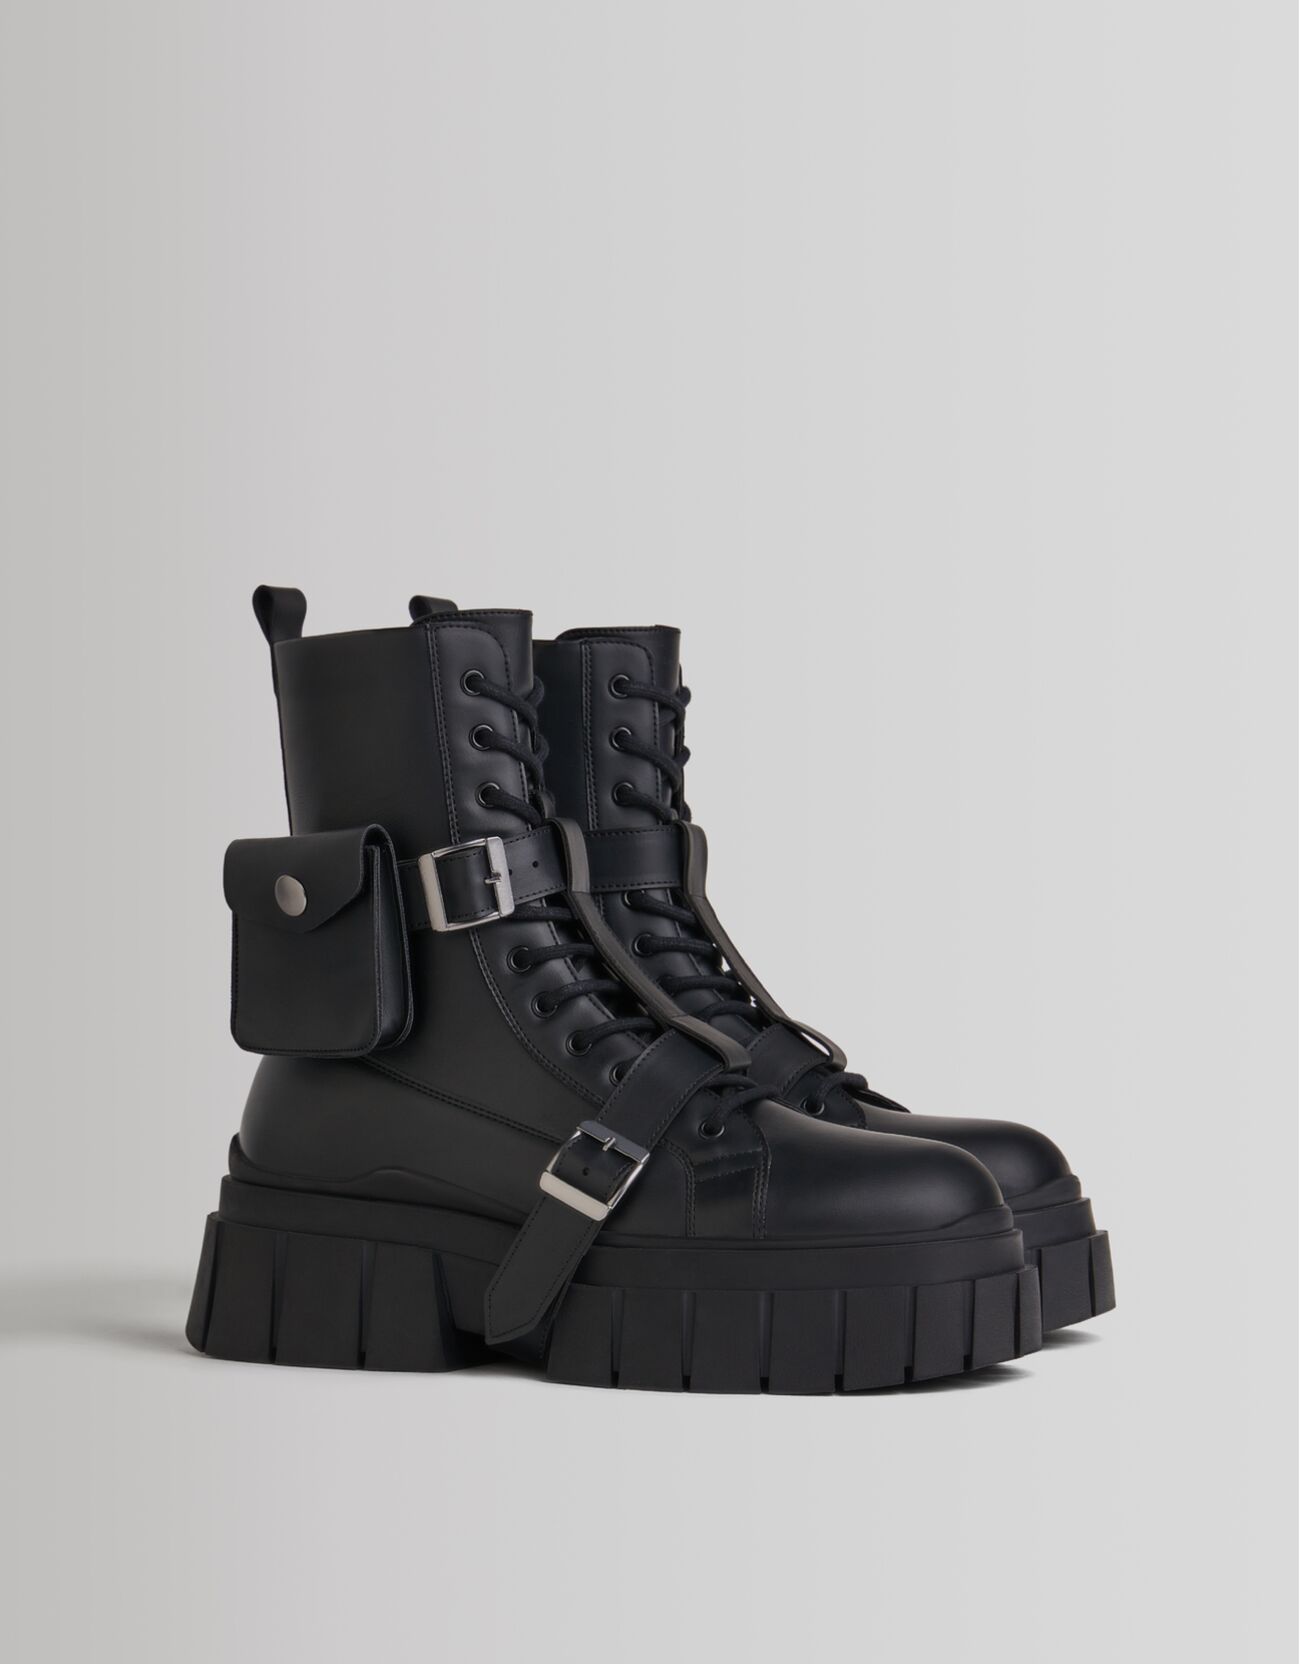 Bershka Lace-Up Boots With Buckles And Pocket Homem 39 Preto